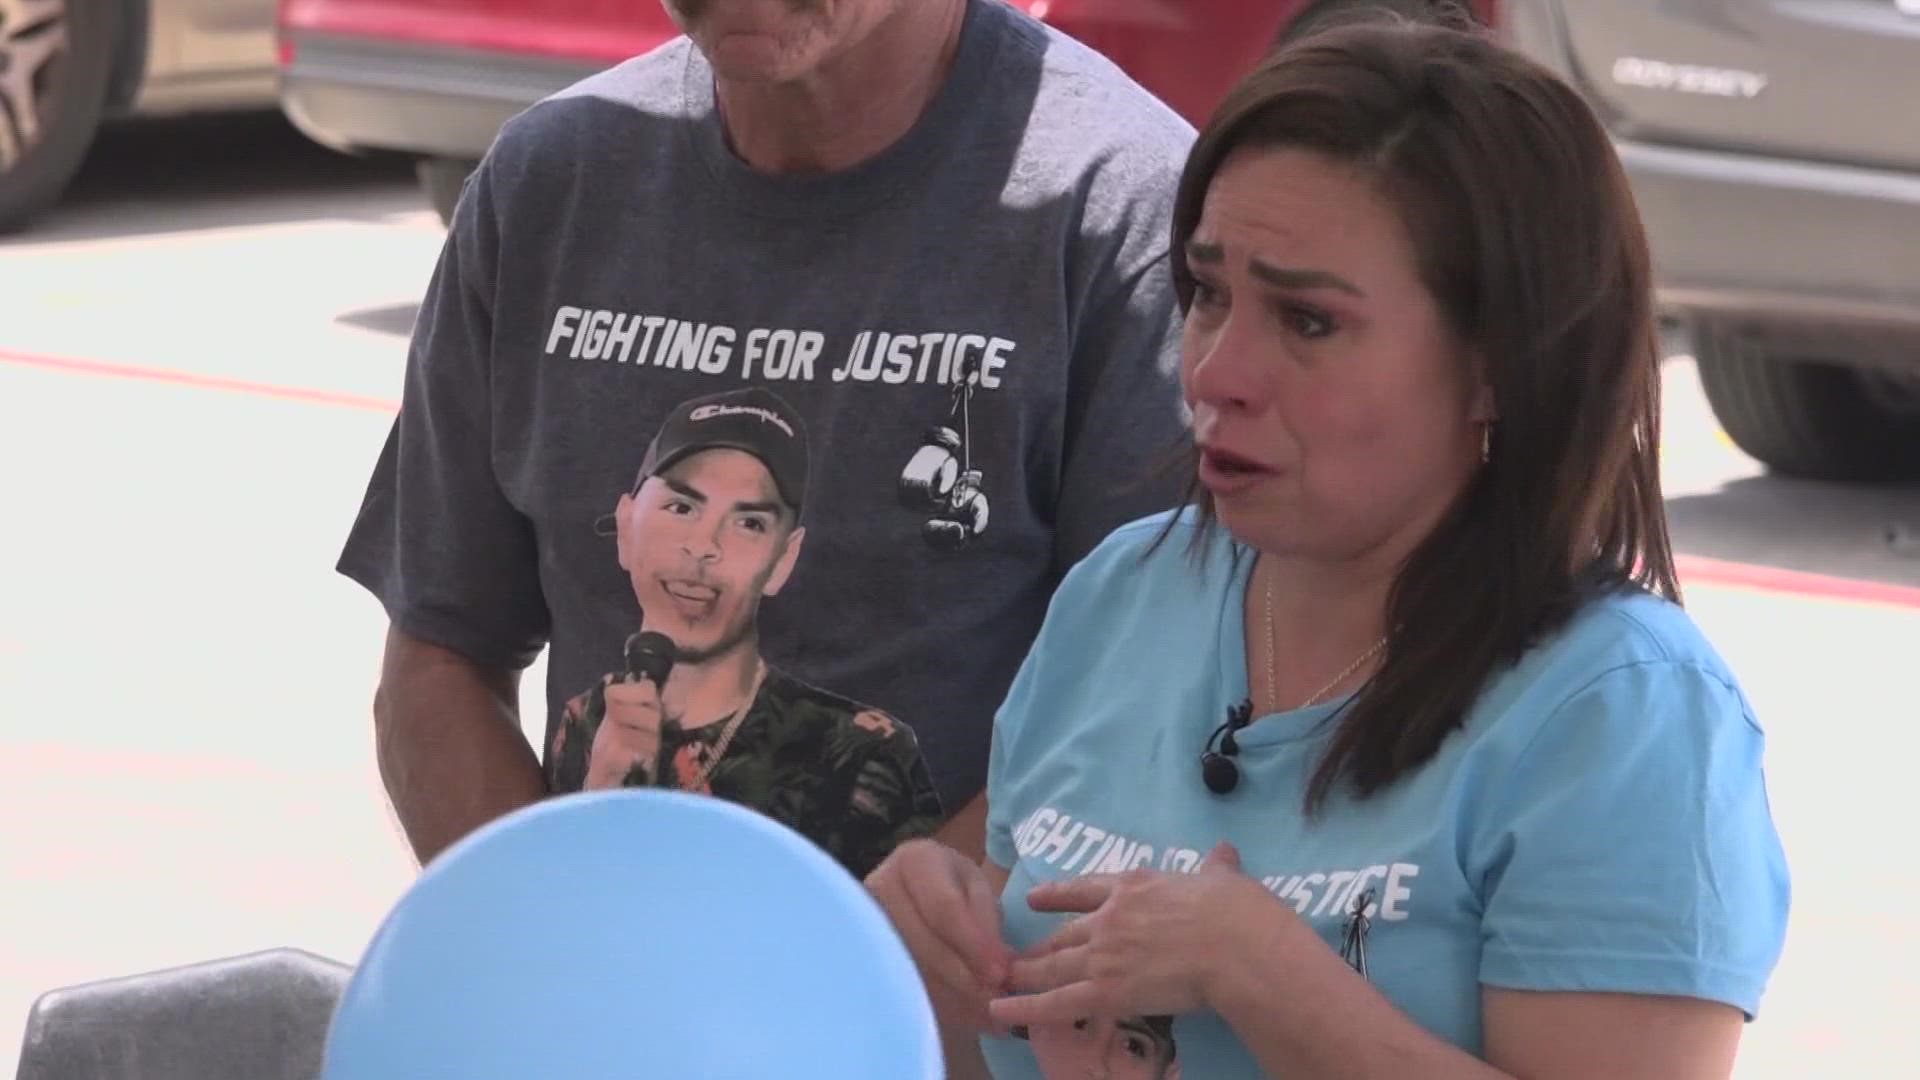 The family of 18-year-old George Ramos gathered on Sunday to remember the professional boxer killed in 2019.